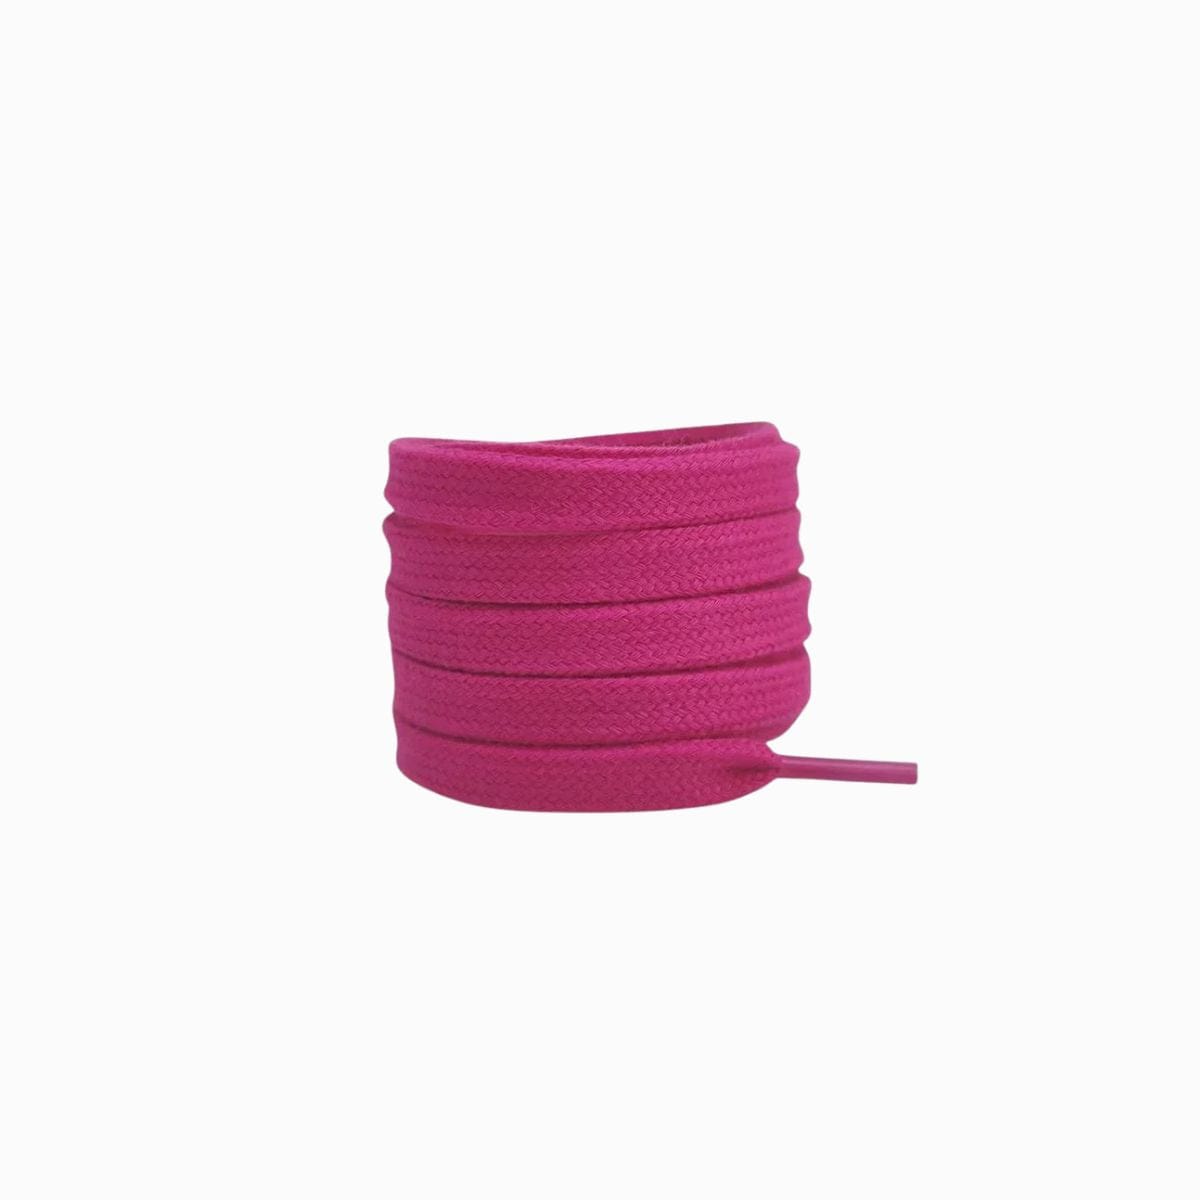 Rose Pink Replacement Adidas Shoe Laces for Adidas Samba ADV Sneakers by Kicks Shoelaces